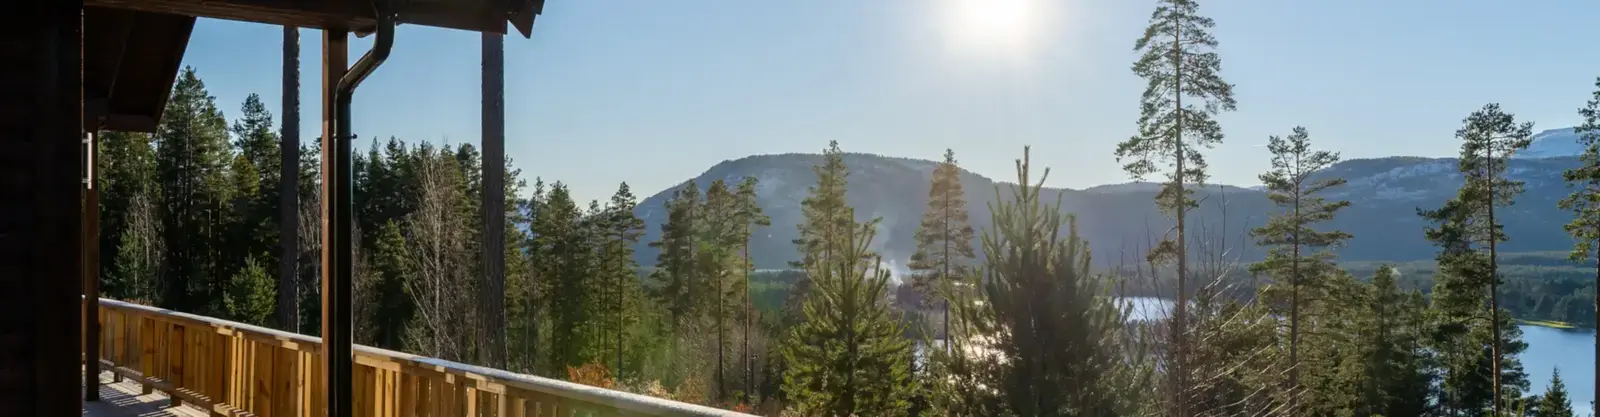 Renting a holiday home in Telemark